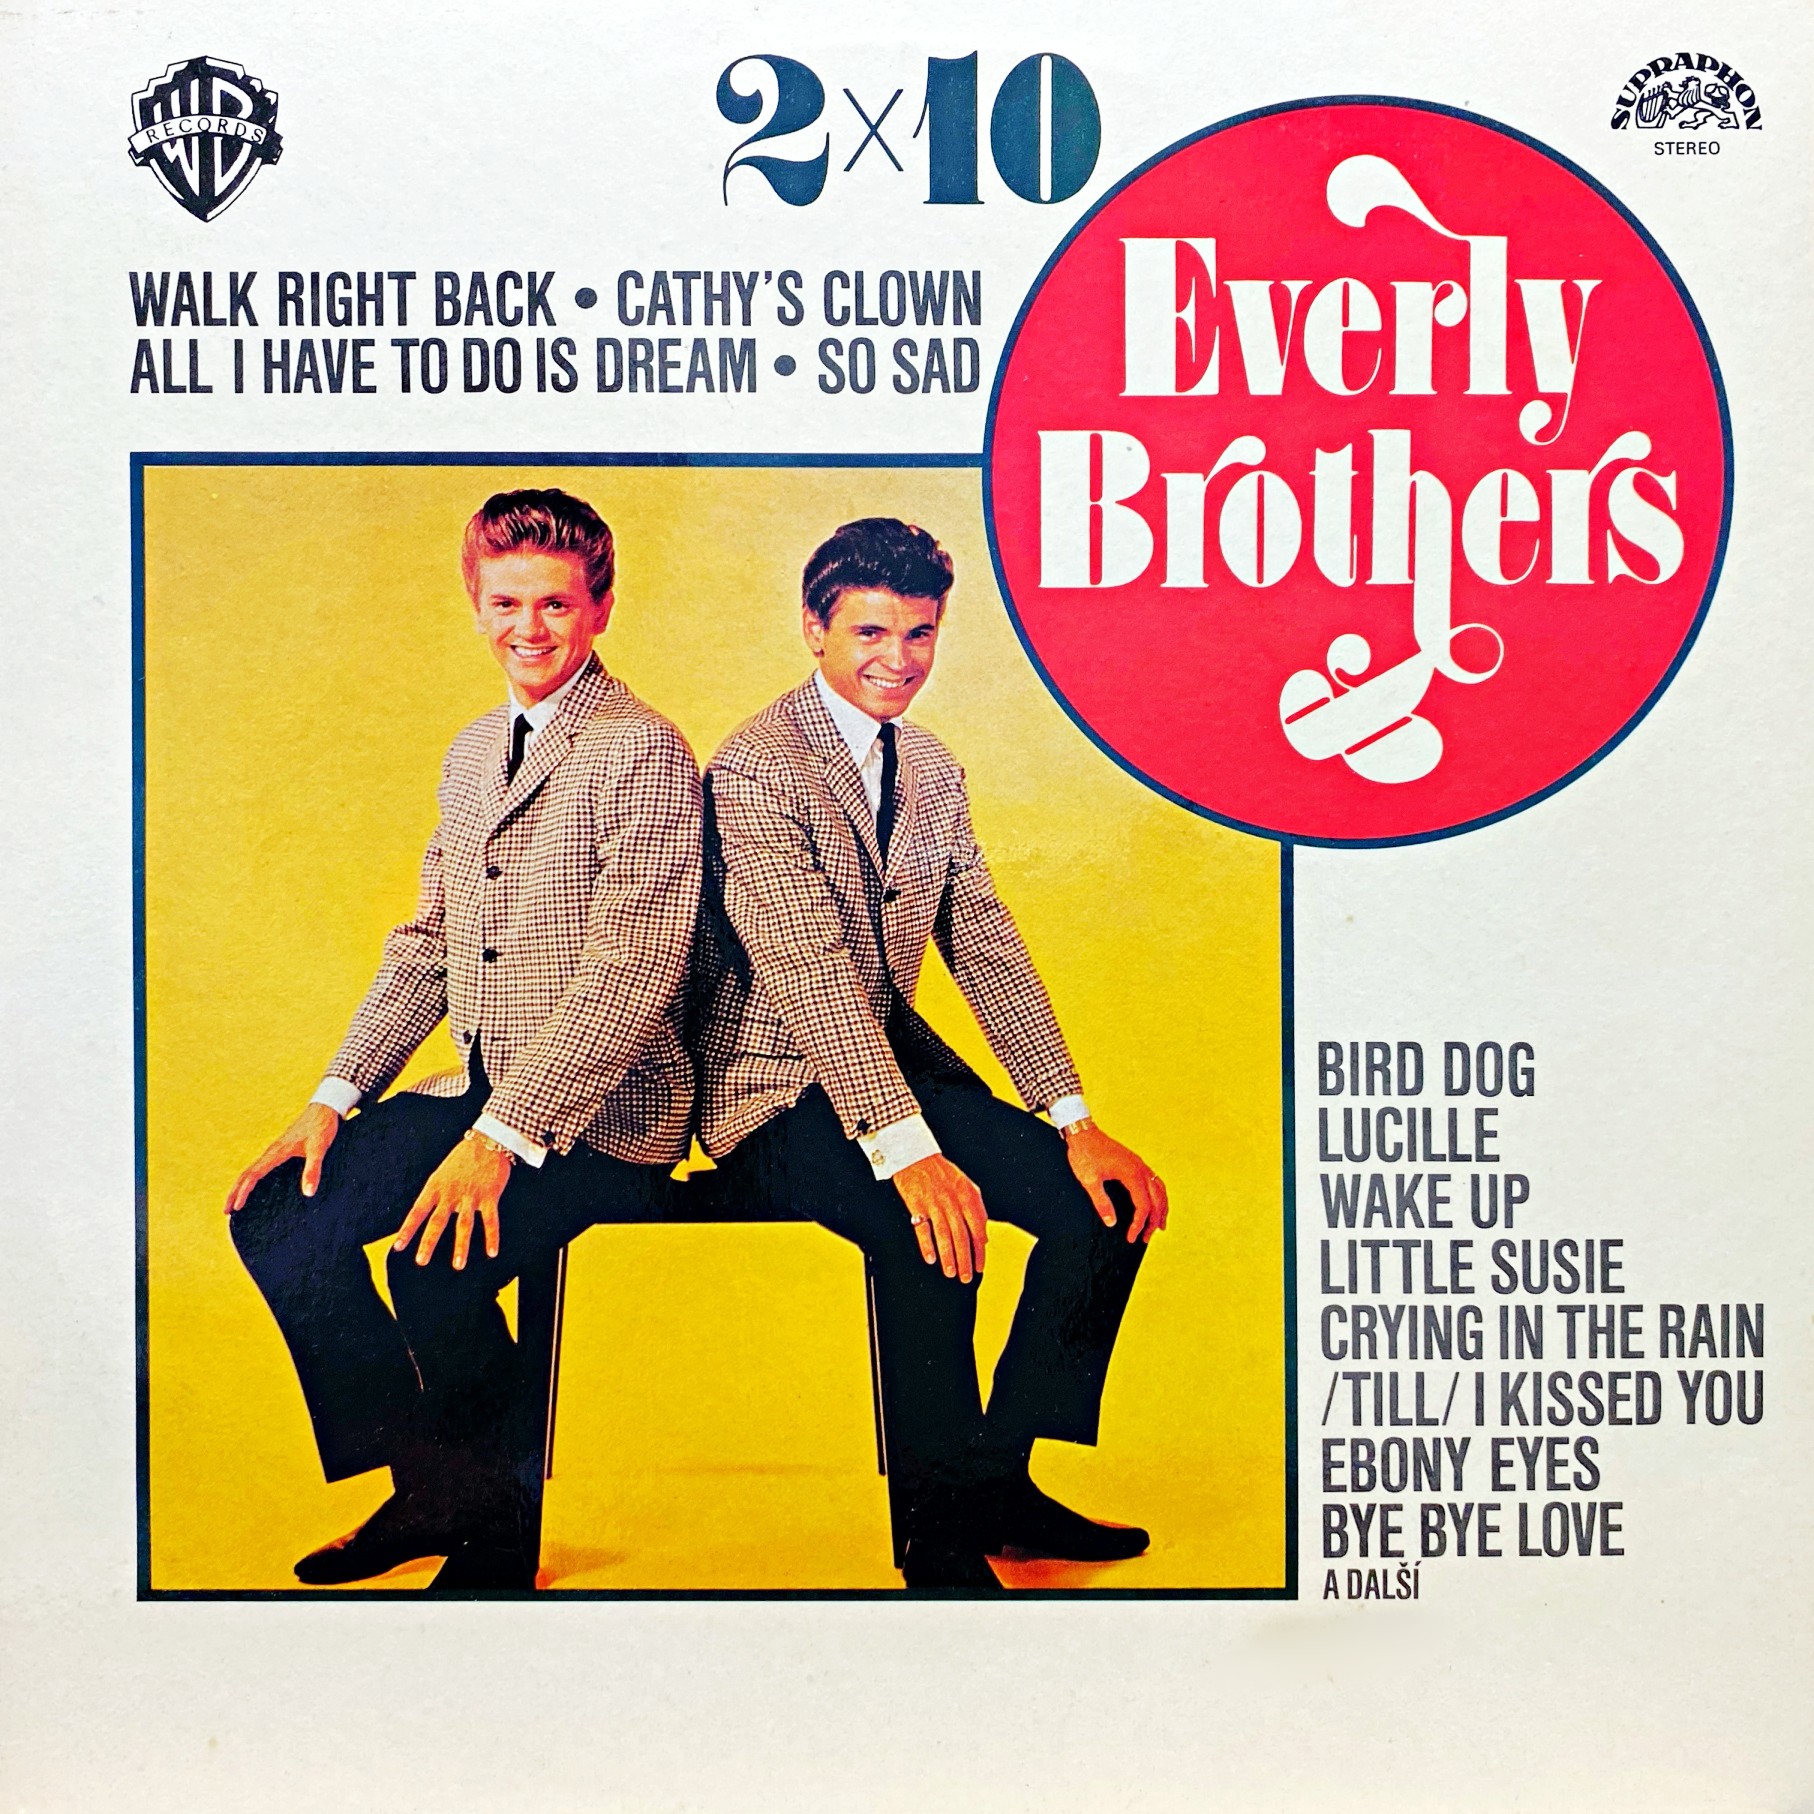 LP Everly Brothers ‎– 2x10 Everly Brothers